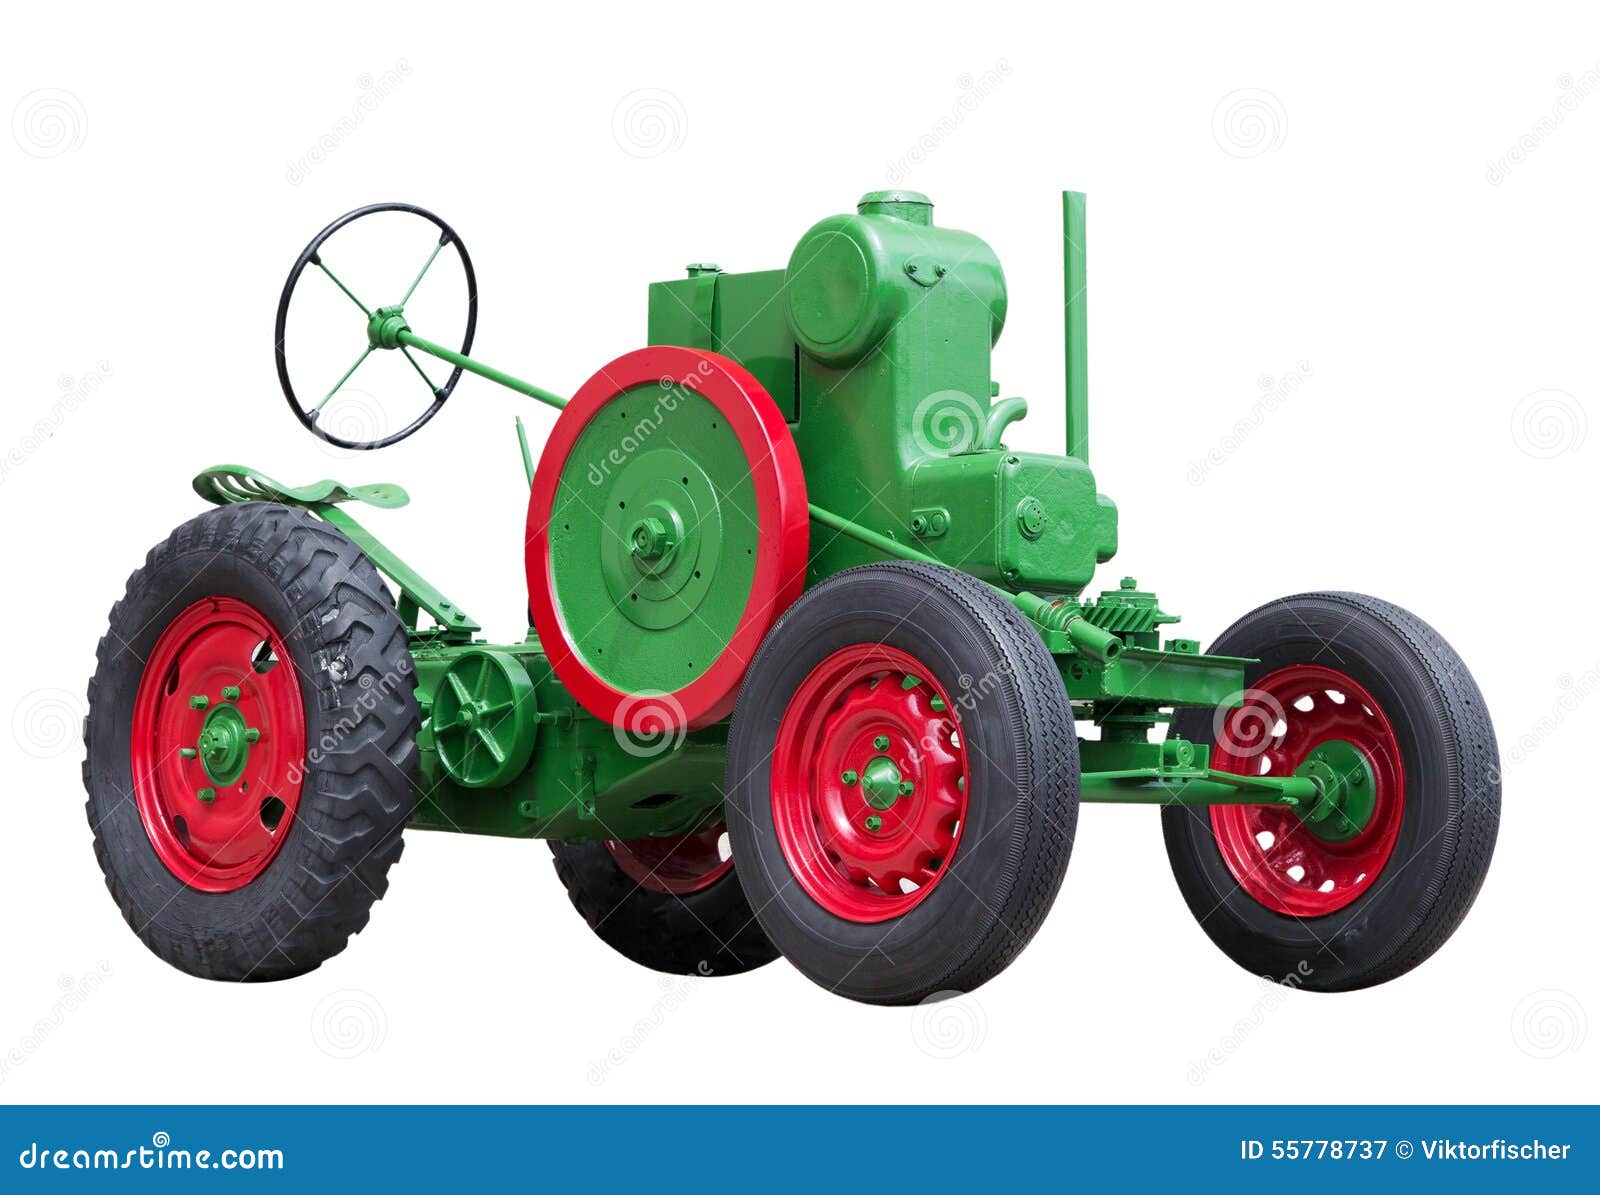 collectible antique toy tractor